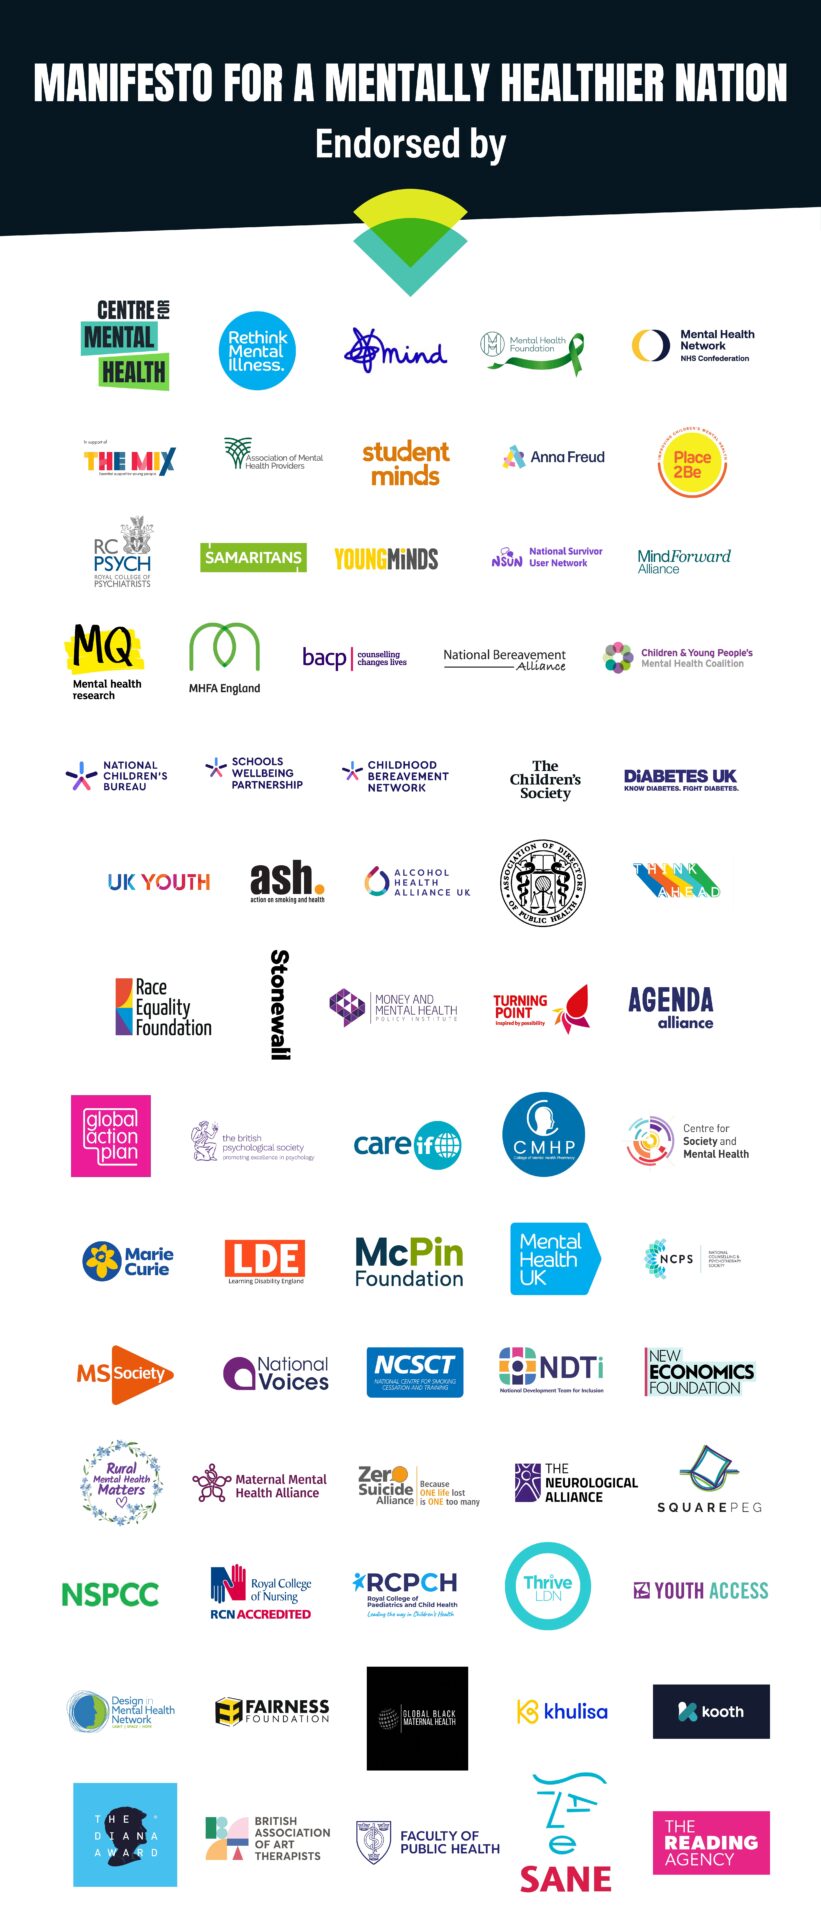 Logos of 70 organisations endorsing Manifesto for A Mentally Healthier Nation: Centre for Mental Health, Mental Health Foundation, Mind, NHS Confederation’s Mental Health Network, Rethink Mental Illness, Royal College of Psychiatrists, Association of Mental Health Providers, Student Minds, Anna Freud Centre, The Mix, National Survivor User Network, Mind Forward Alliance, Place2Be, Samaritans, YoungMinds, MQ Mental Health Network, MHFA England, BACP, National Children's Bureau, Schools Wellbeing Partnership, Childhood Bereavement Network, National Bereavement Alliance, Children & Young People's Mental Health Coalition, UK Youth, ASH, Alcohol Health Alliance UK, Association of Directors of Public Health, The Children's Society, Diabetes UK, Race Equality Foundation, Stonewall, Money & Mental Health Policy Institute, Turning Point, Agenda Alliance, Think Ahead, Global Action Plan, BPS, CareIf, CMHP, Centre for Society & Mental Health, Marie Curie, MS Society, National Voices, NCSCT, NDTI, New Economics Foundation, The Neurological Alliance, NSPCC, Royal College of Nursing, RCPCH, Thrive LDN, Youth Access and others